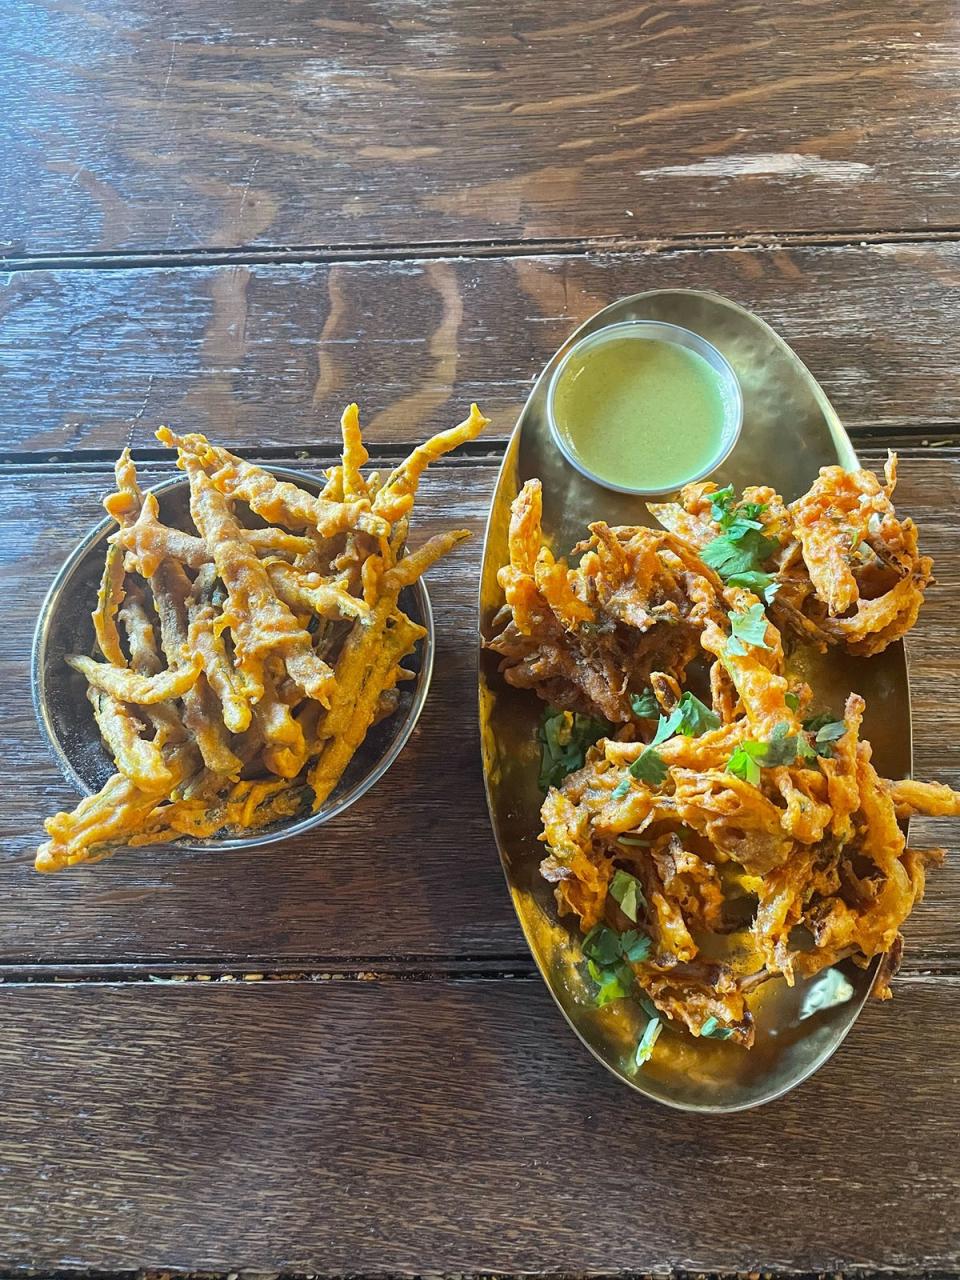 The okra fries are a delight (Kate Ng)